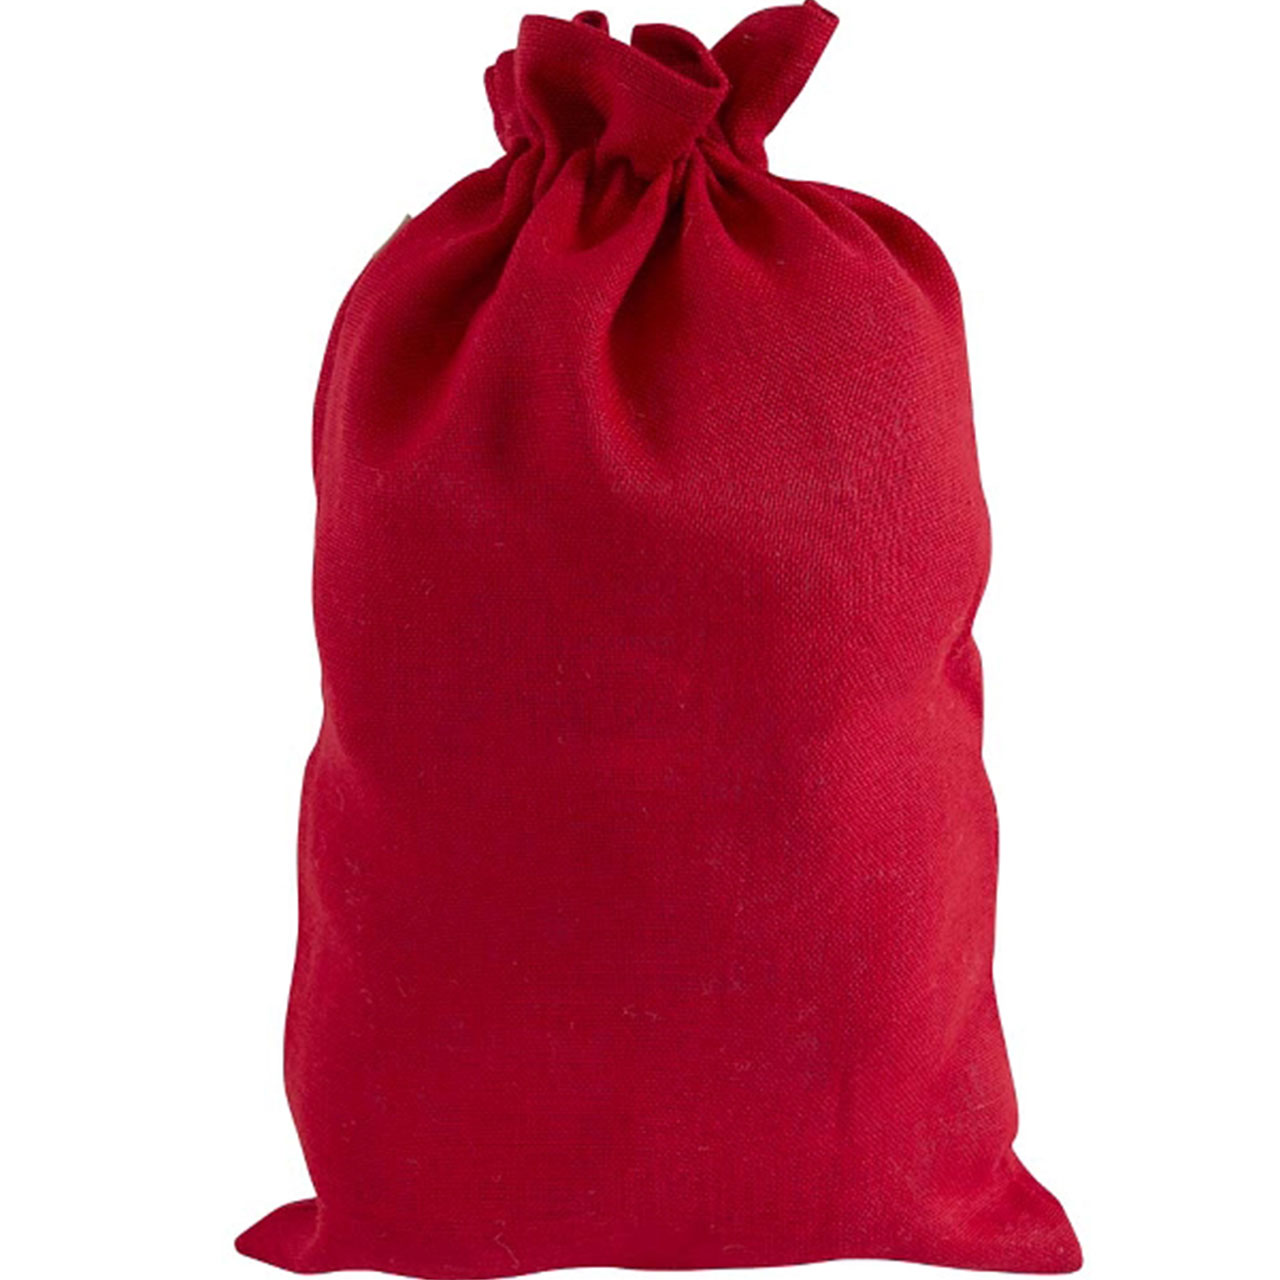 Jute Sack - Red with Sequin Stars (XL)